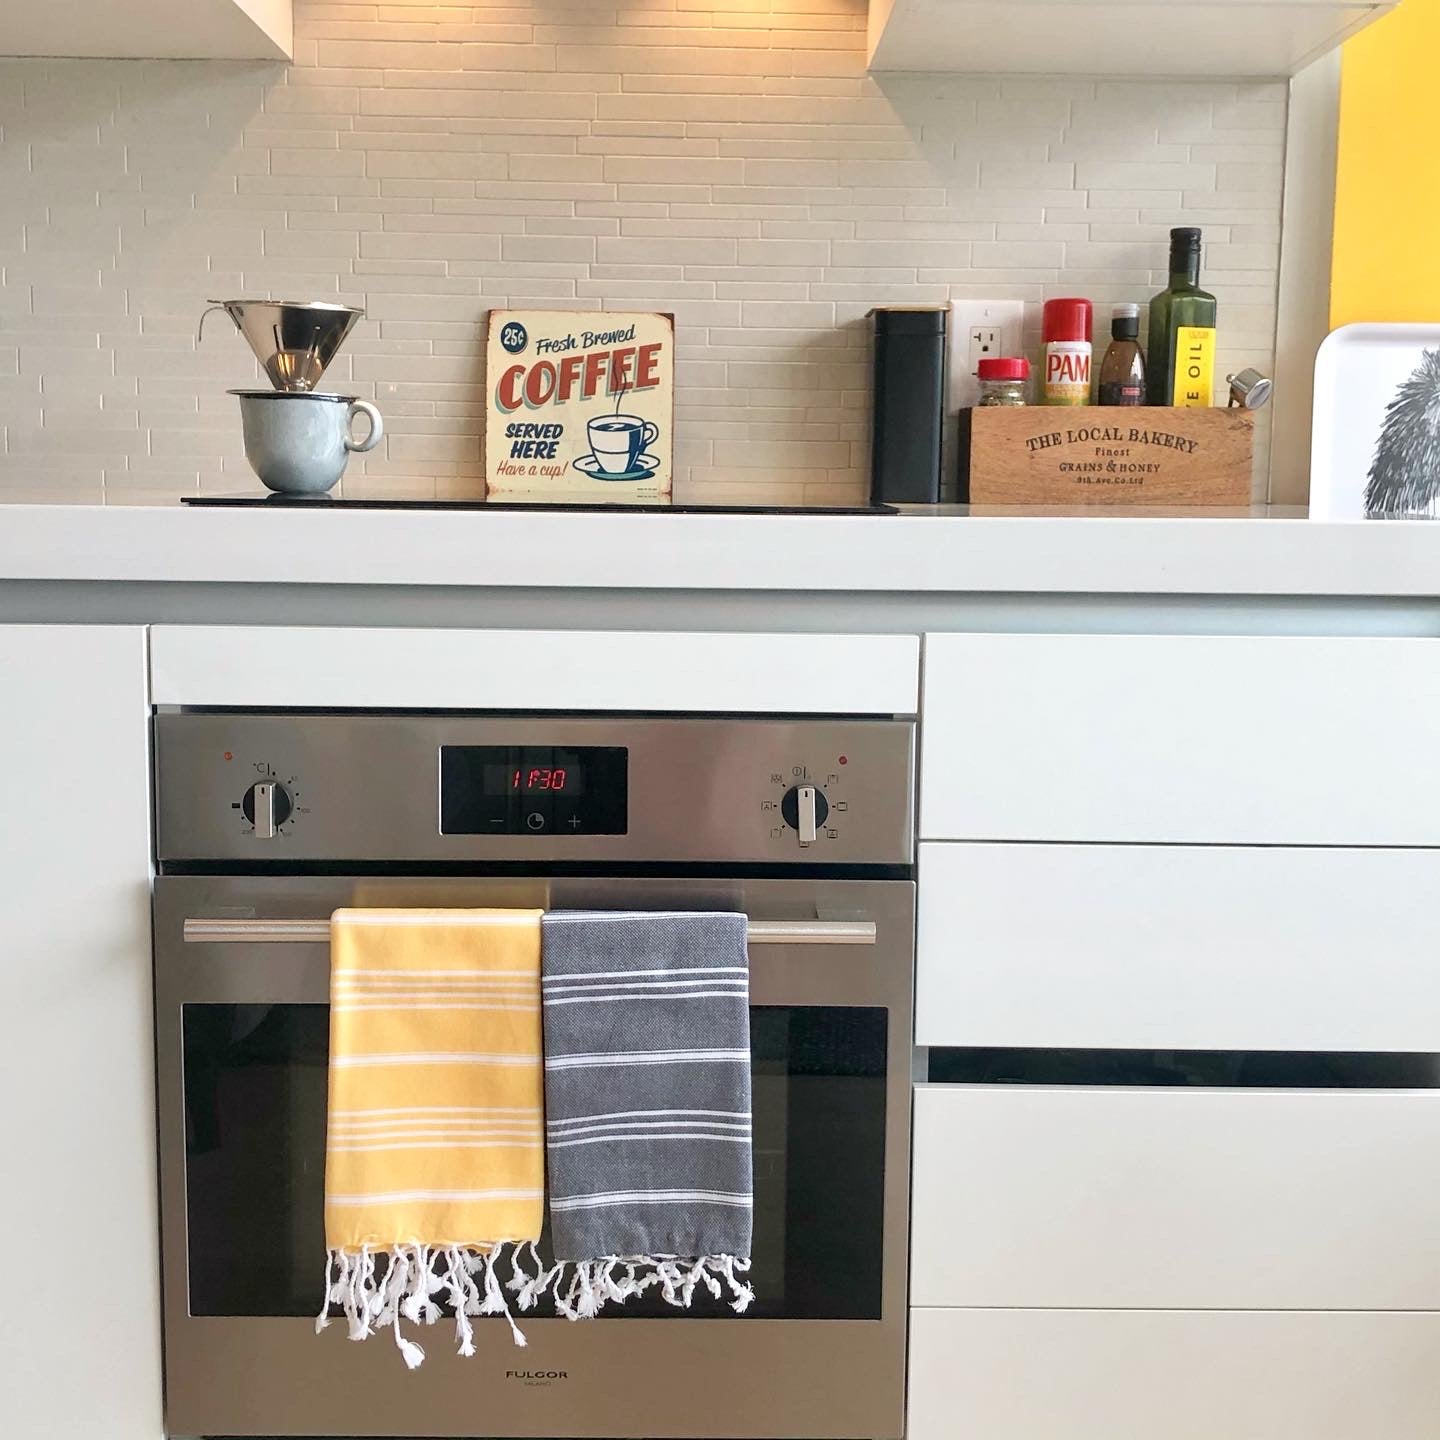 Yellow and black striped Turkish hand towels in fun modern kitchen